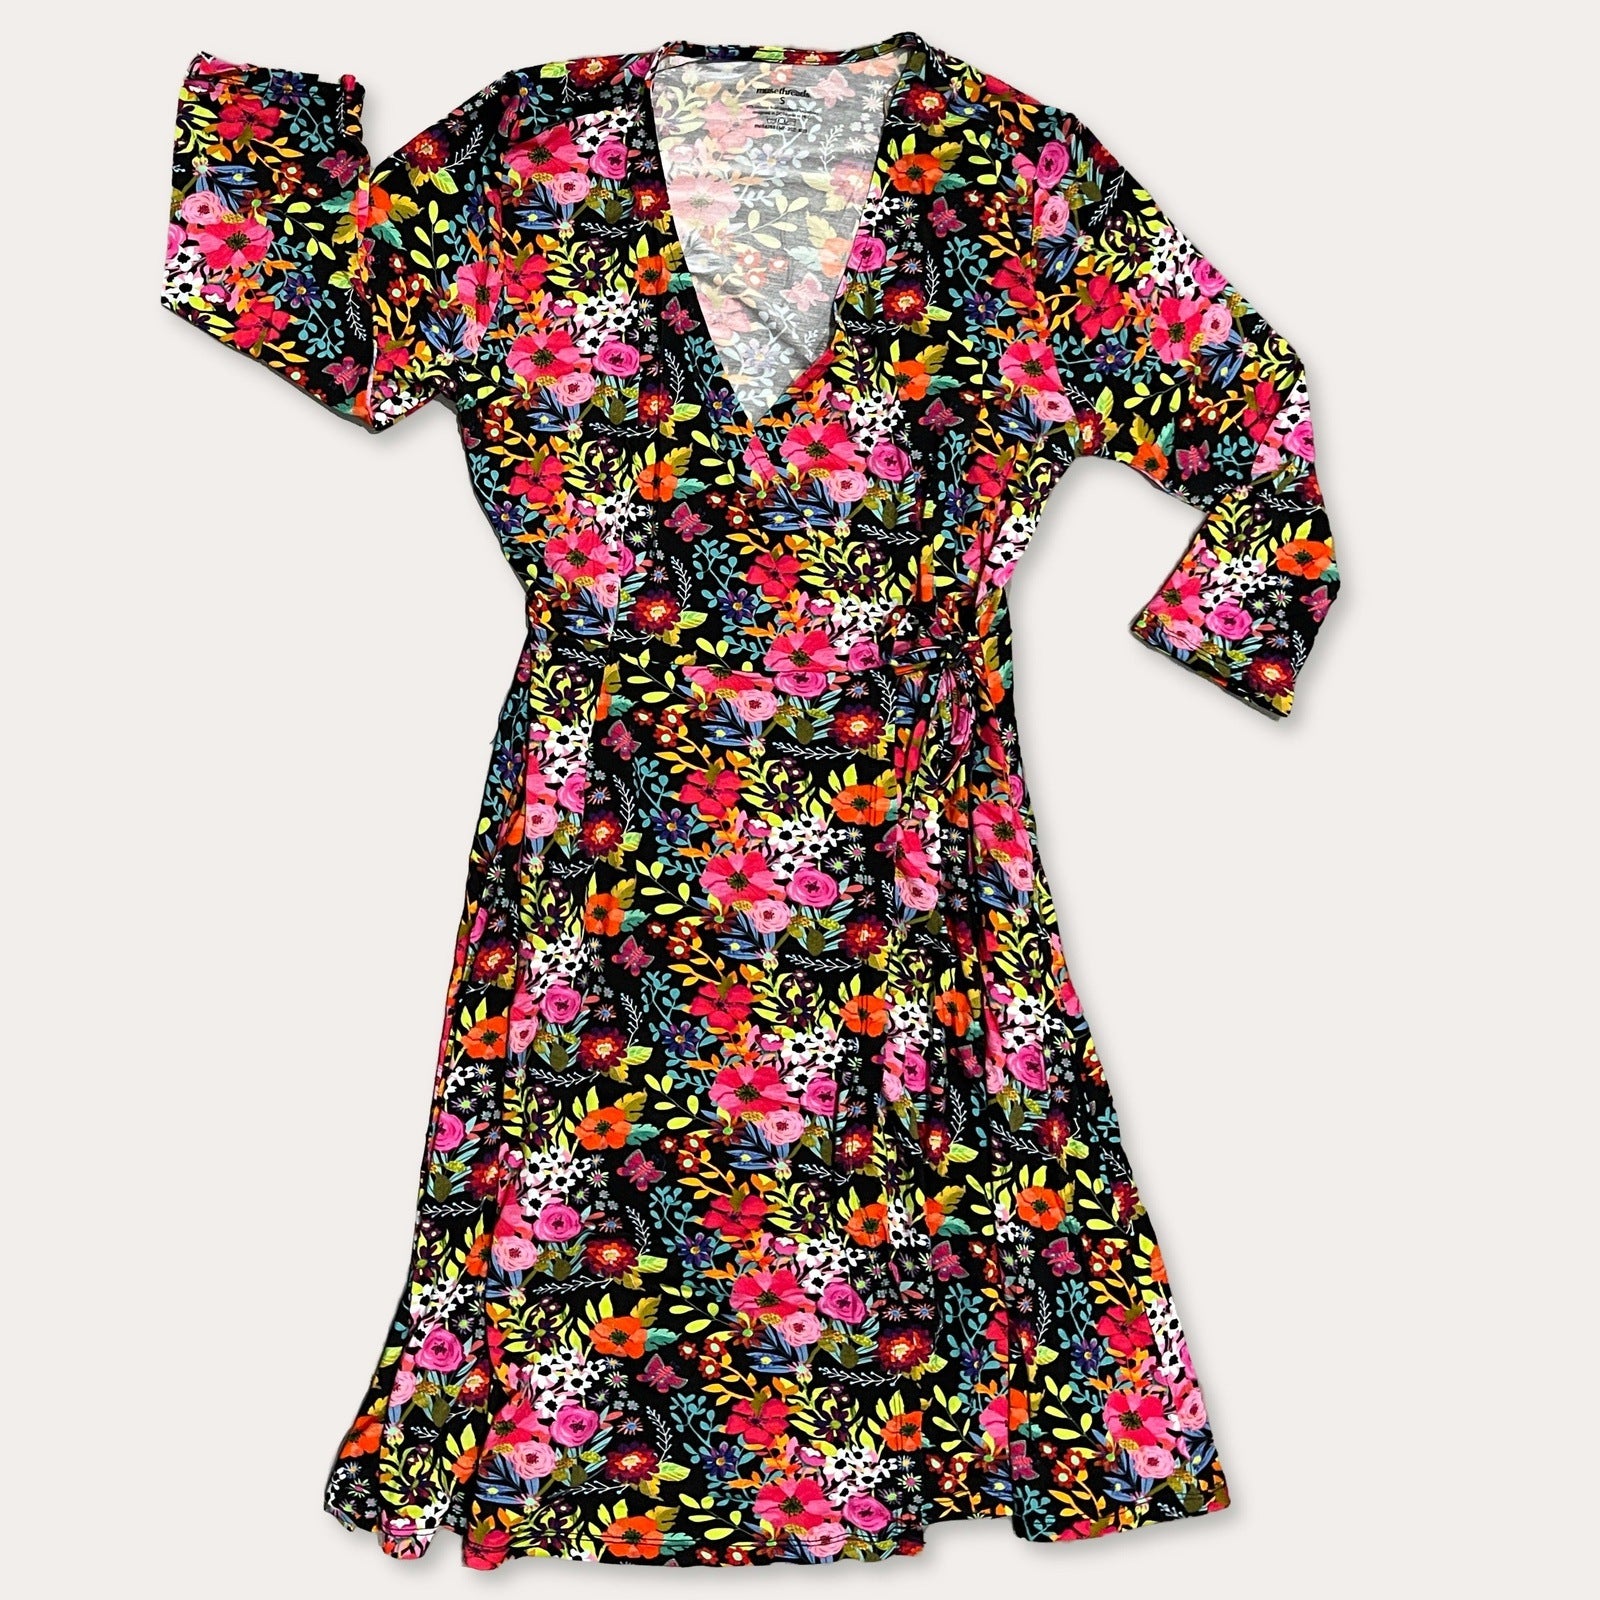 Floral Tapestry Women's 3/4 Sleeve Wrap Dress